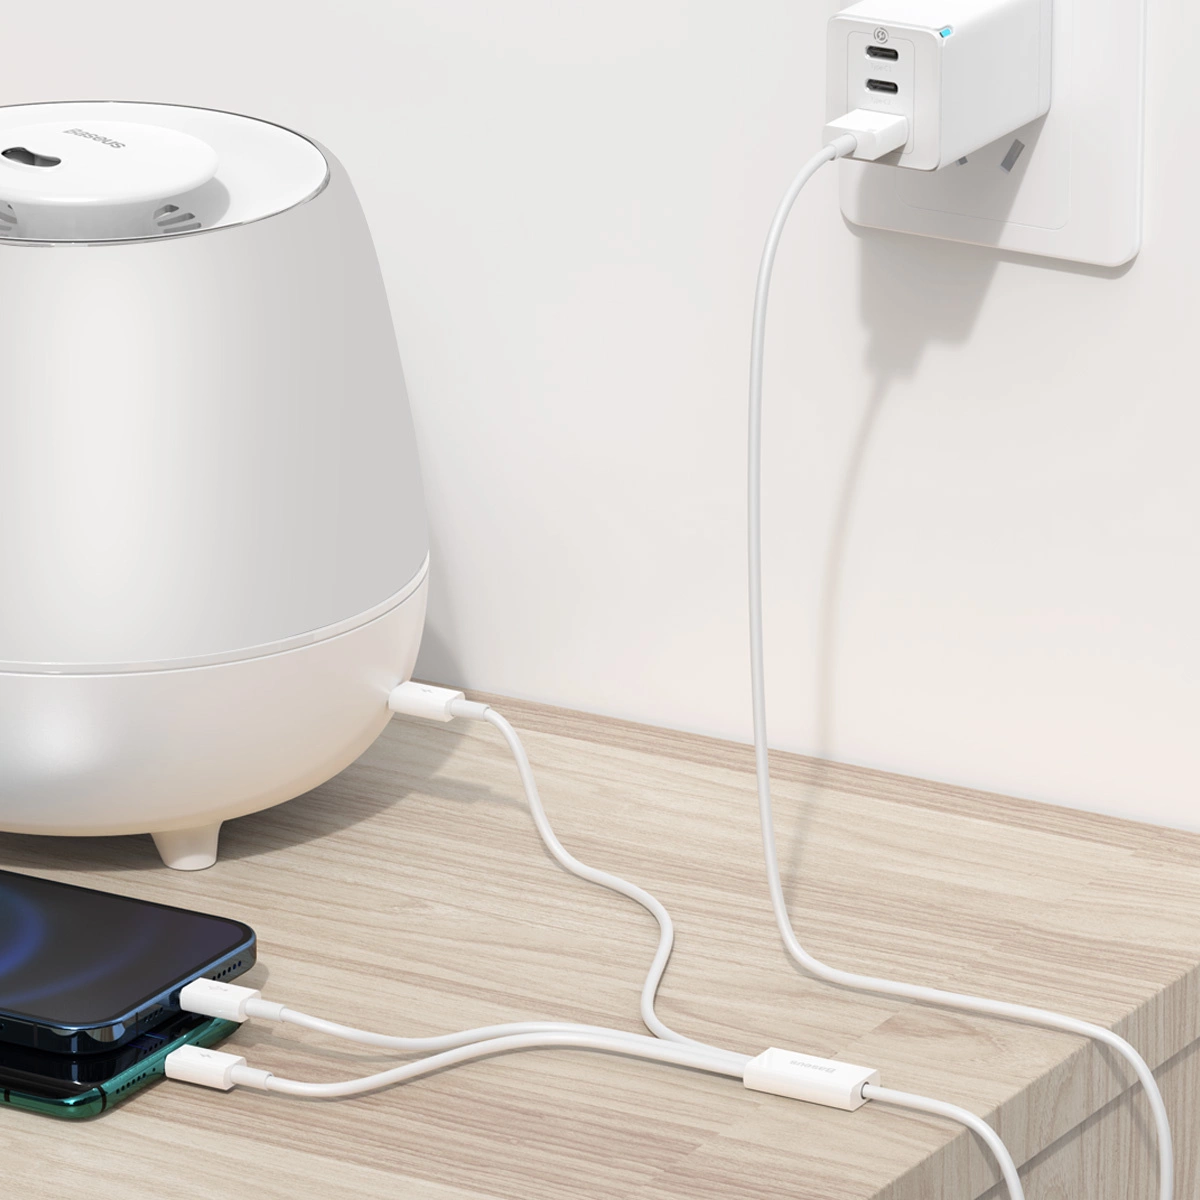 Two phones and a speaker connected to charging simultaneously using a Baseus Superior Series cable